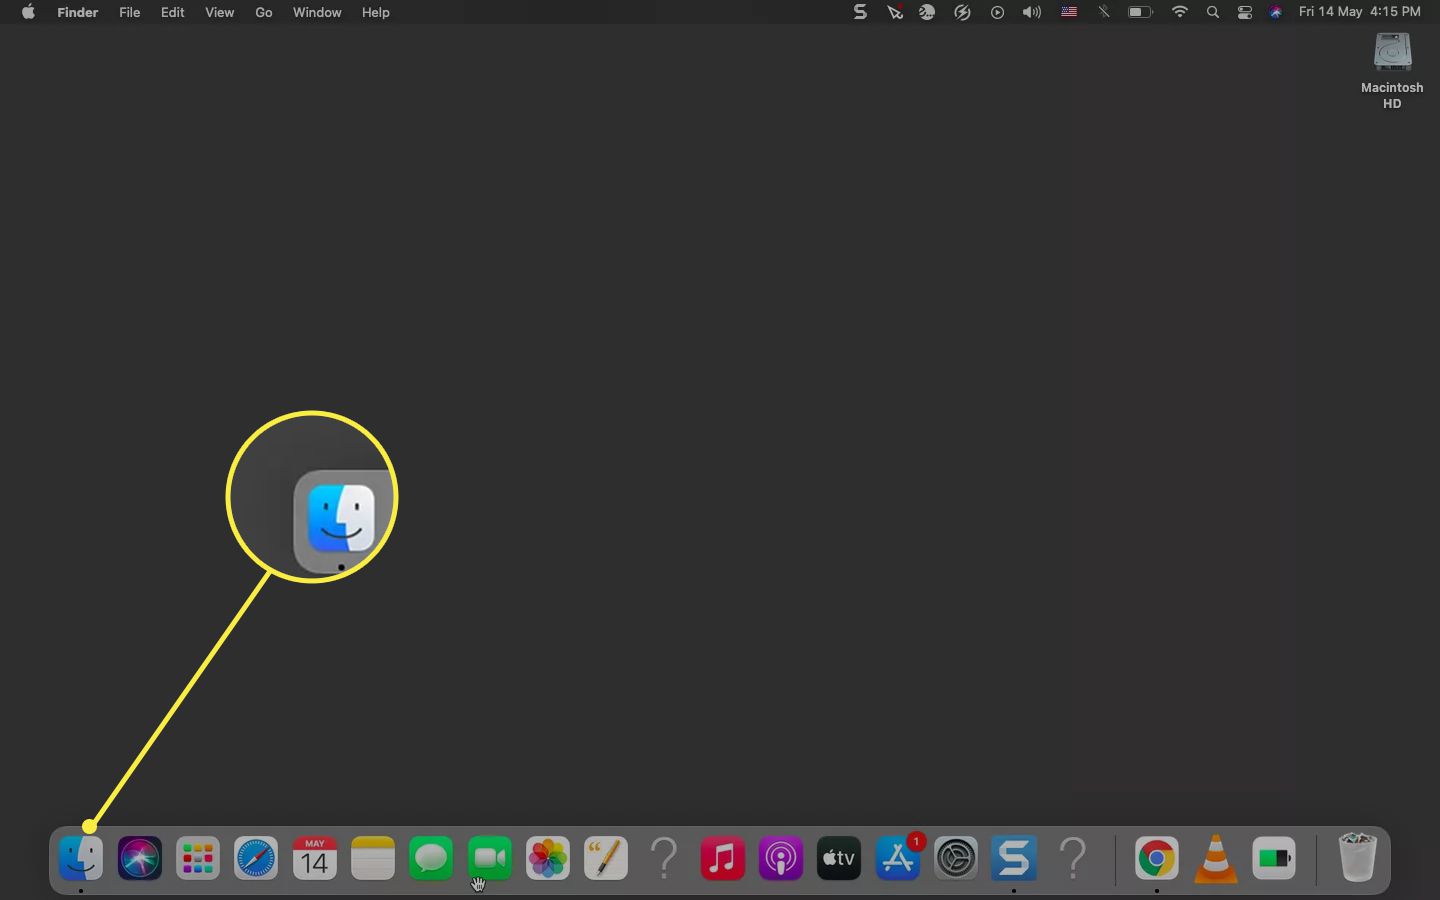 How To Add Chrome Profile Shortcut To Desktop